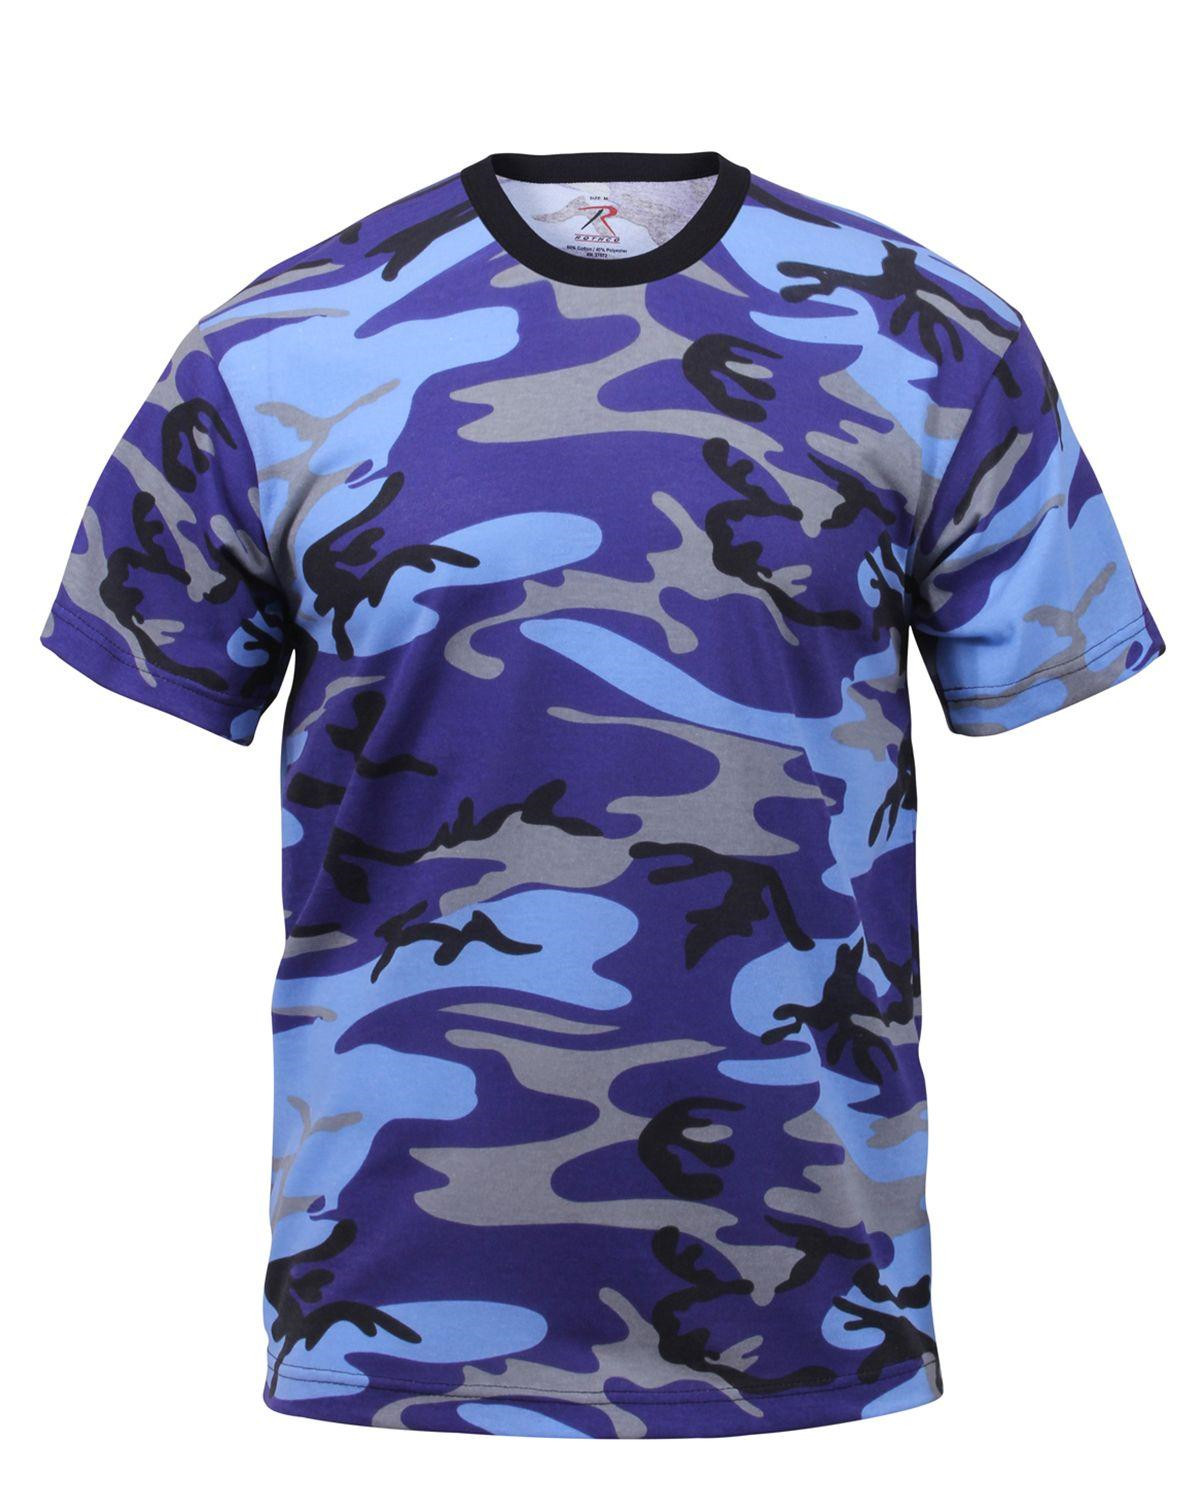 6: Rothco T-shirt - Mange Camouflager (Electric Blue Camo, S)